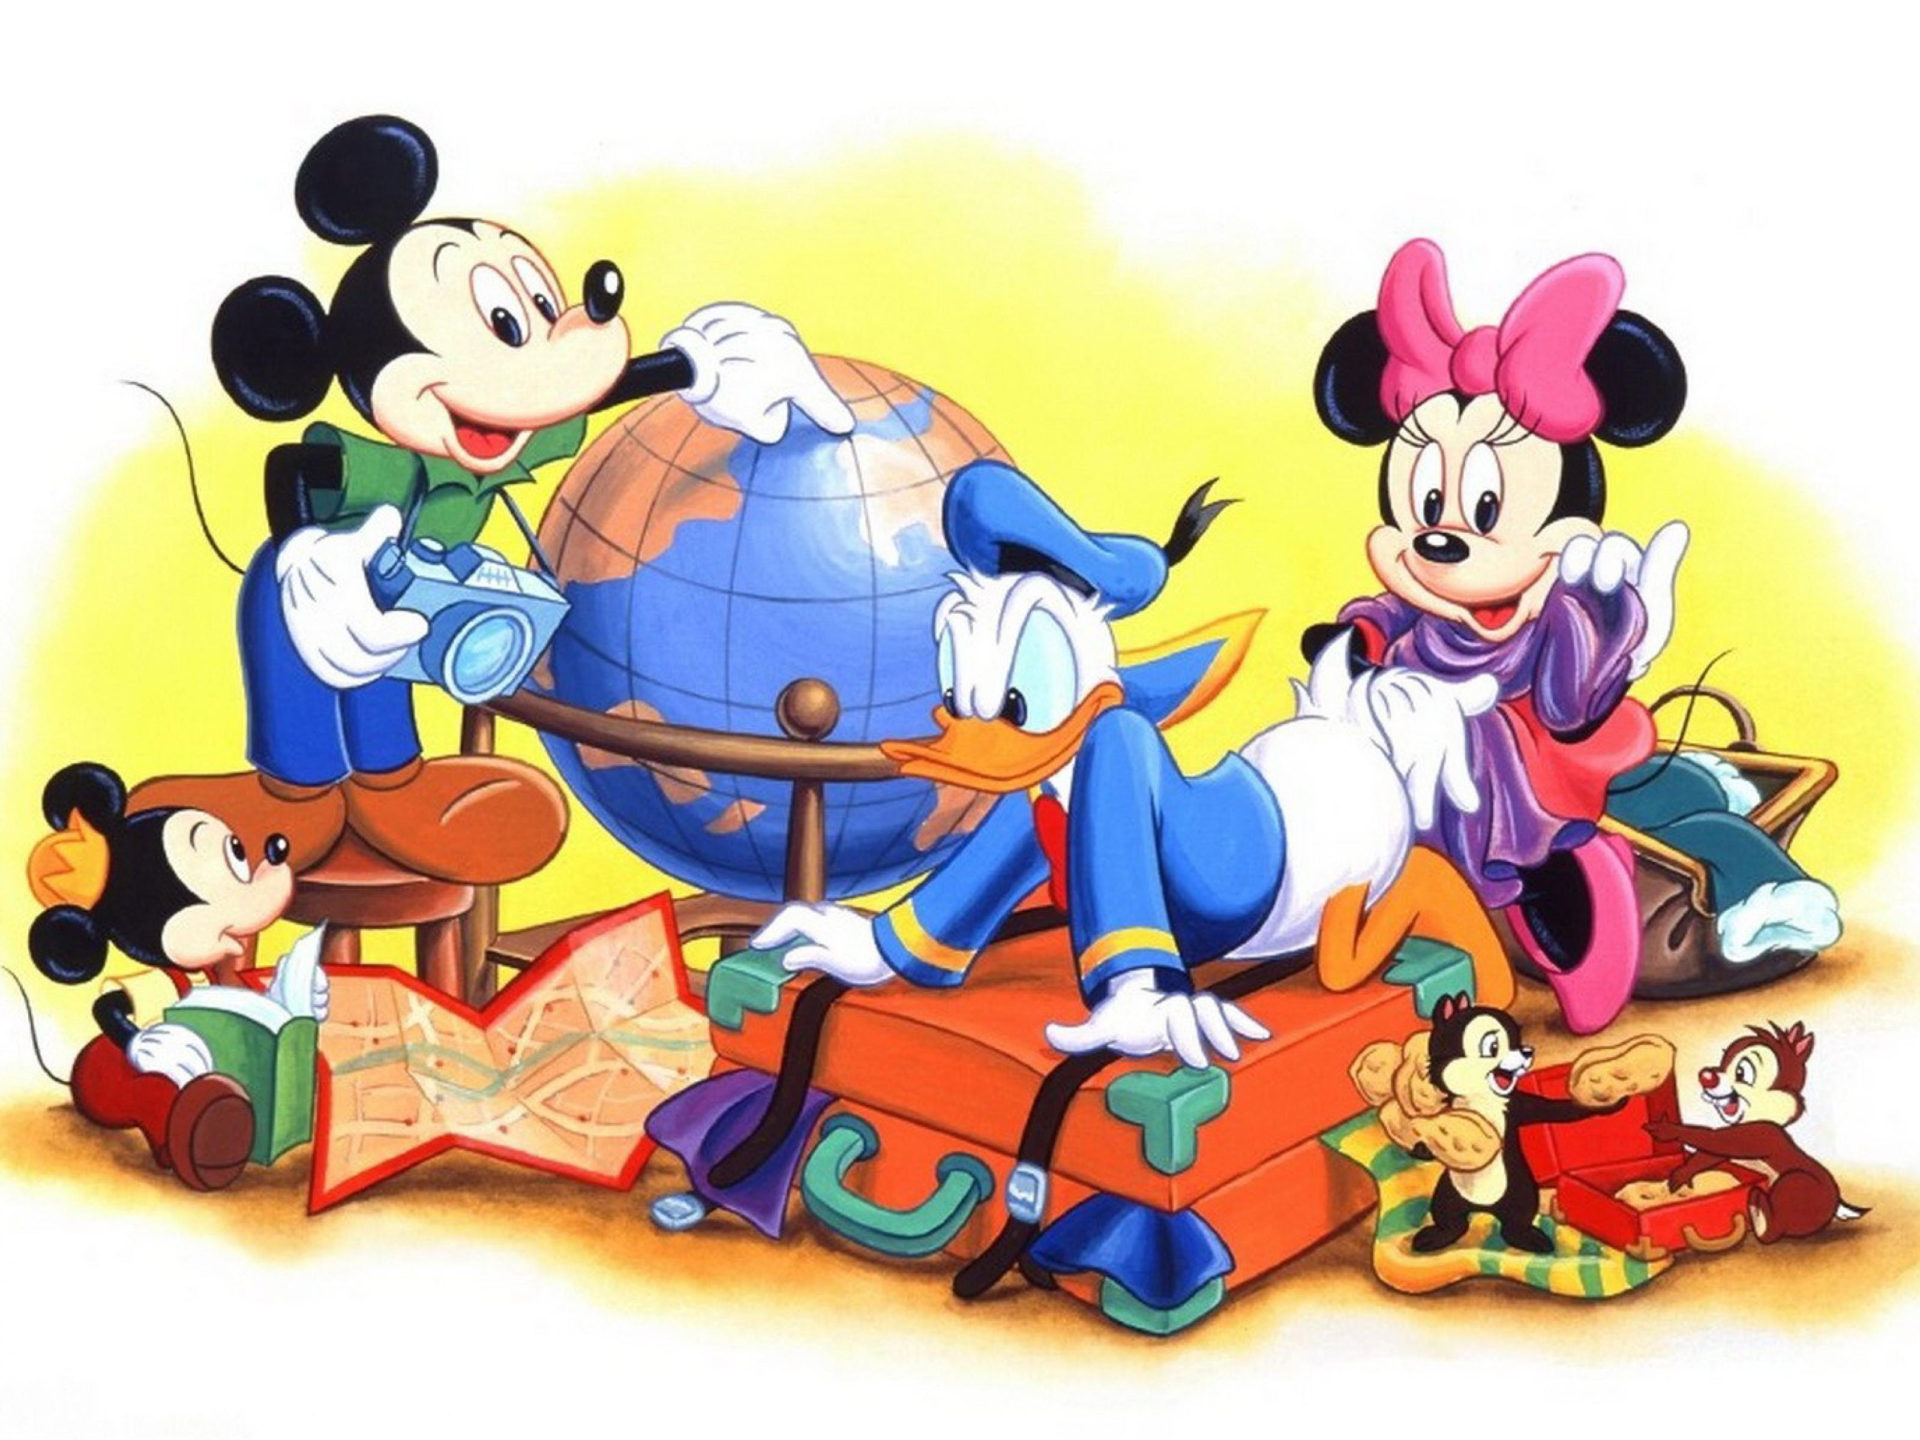 Mickey Mouse Donald Duck Minnie Mouse Preparing For A Summer Holiday Wallpaper HD 3840x2400, Wallpaper13.com